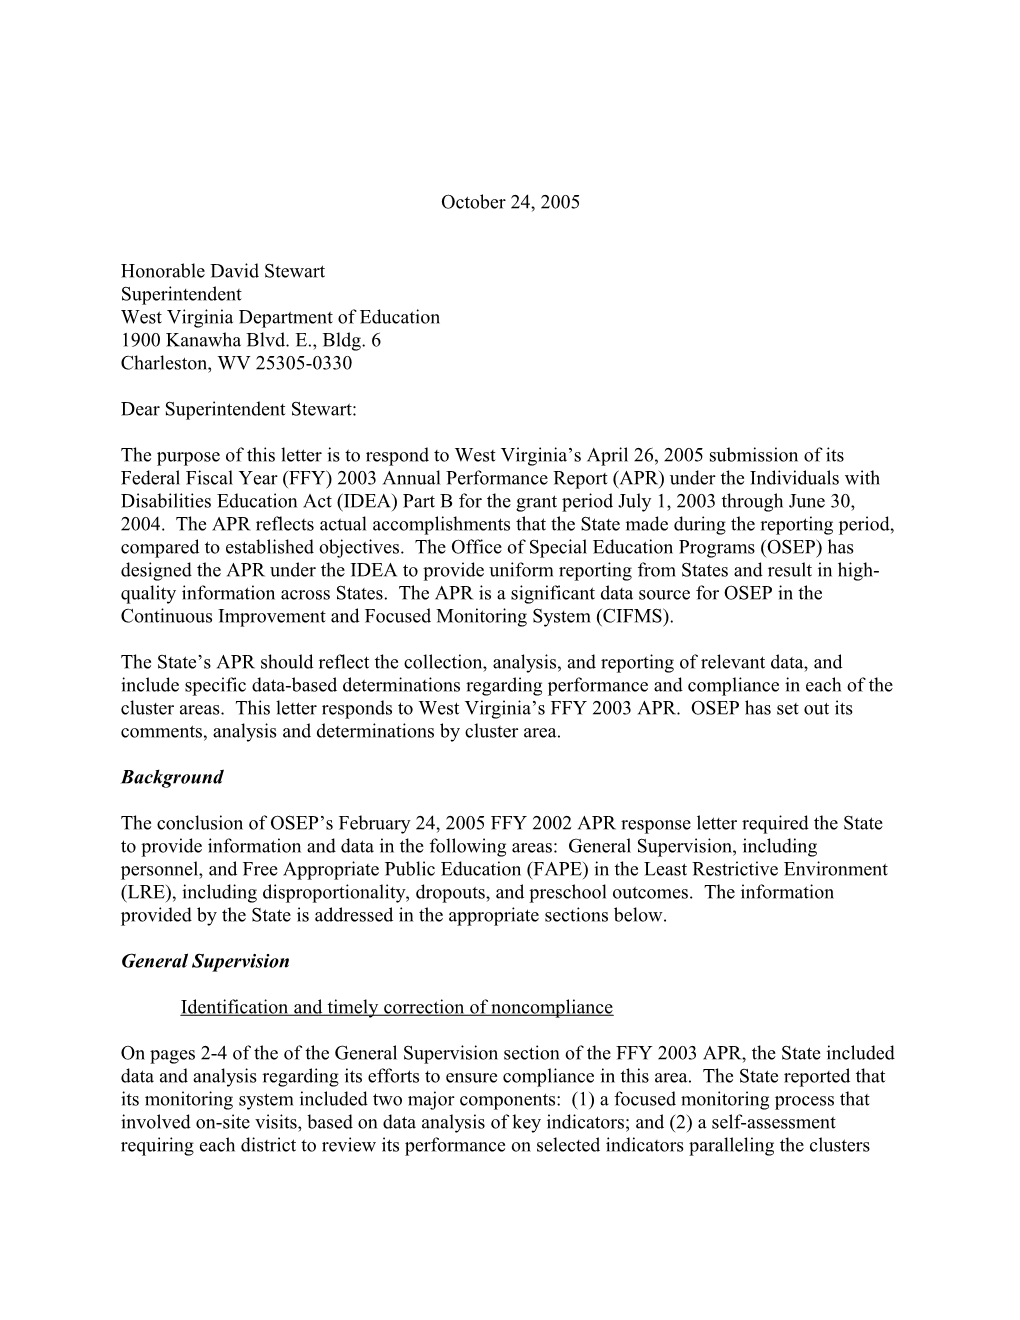 West Virginia Part B APR Letter for Grant Year 2003-2004 (Msword)